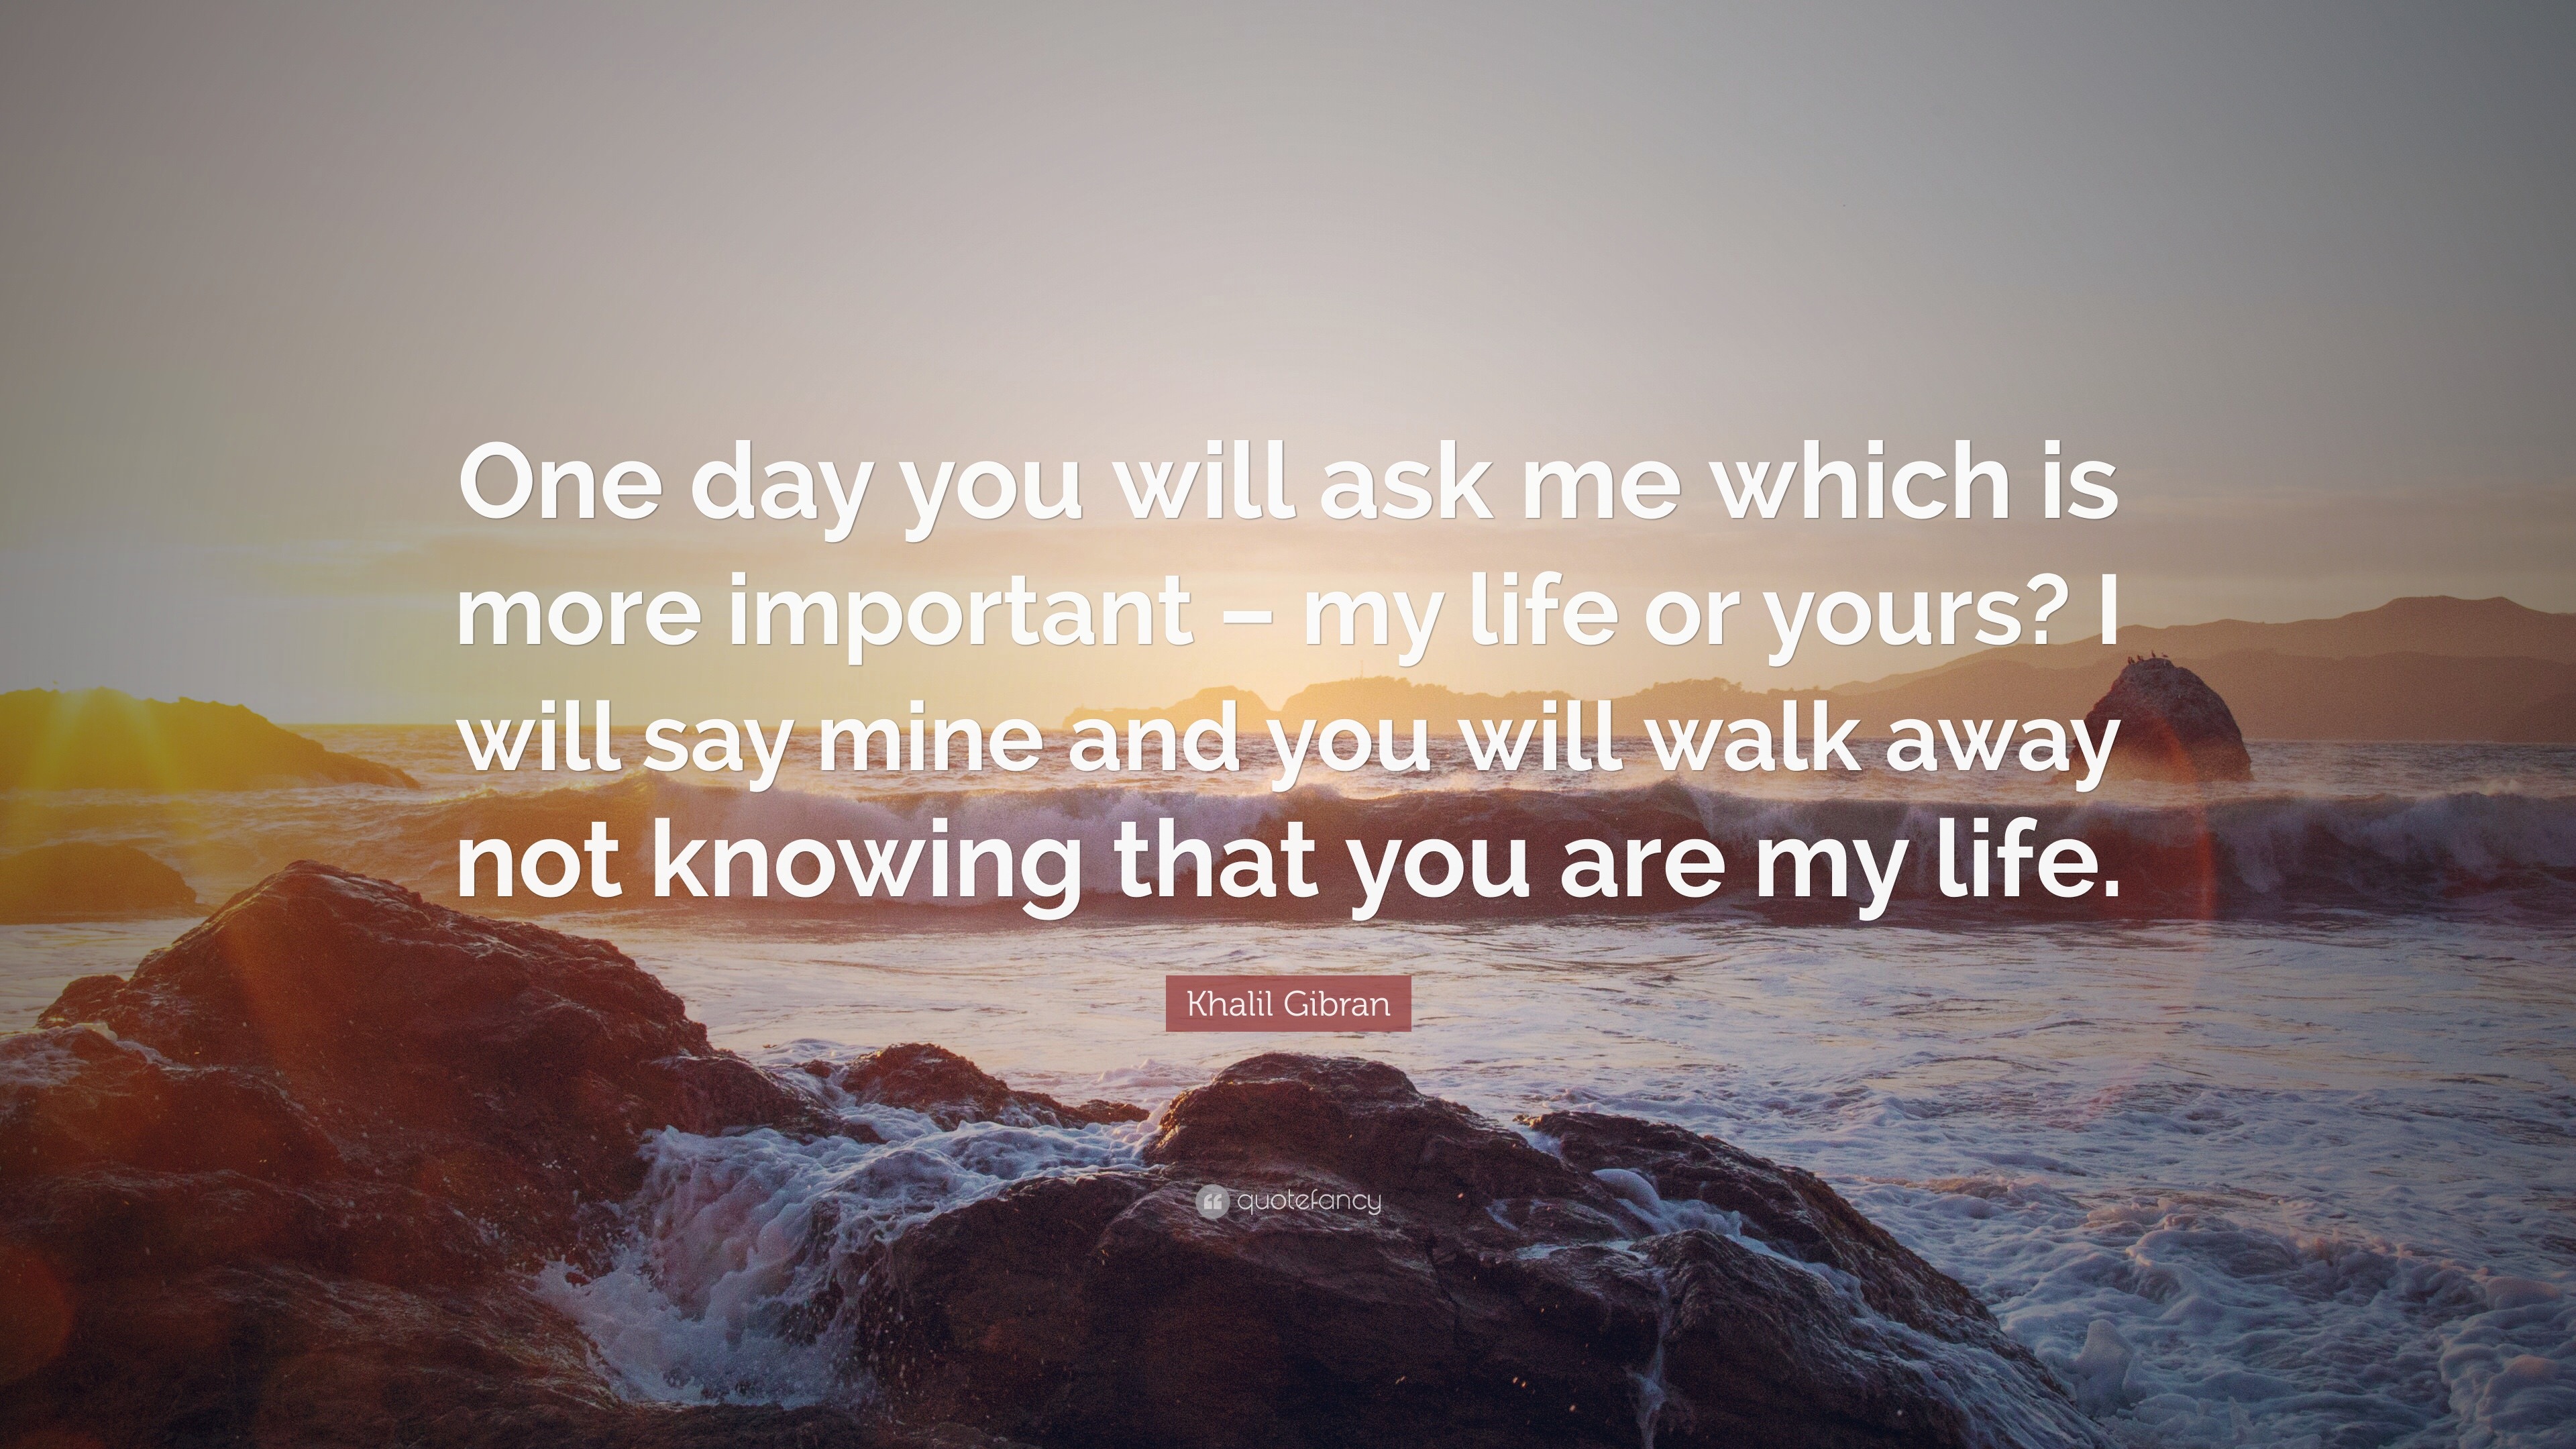 Khalil Gibran Quote “ e day you will ask me which is more important –